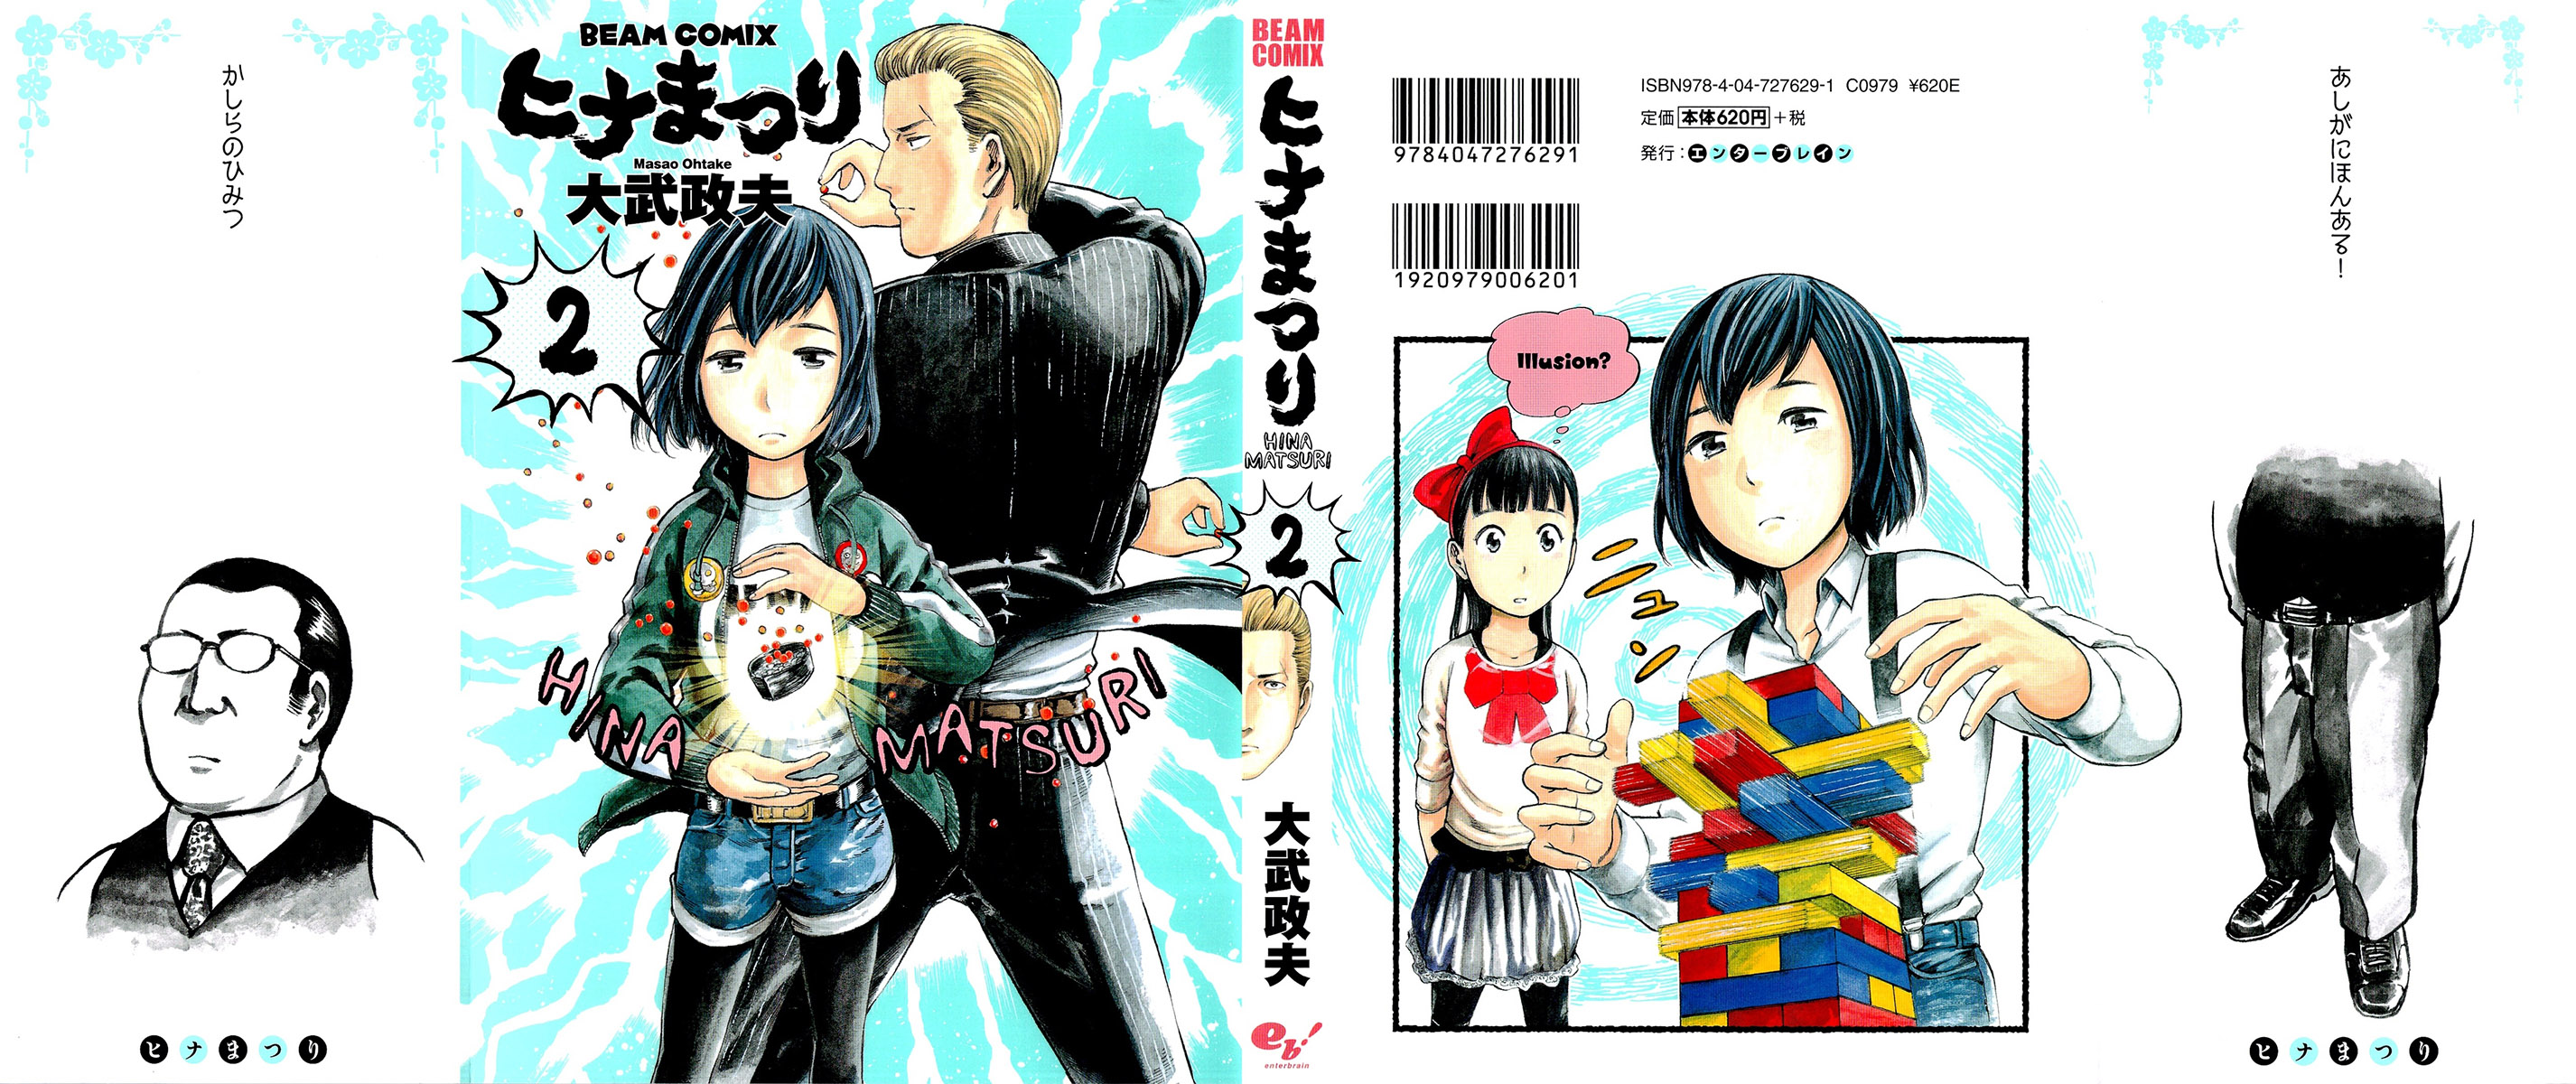 Hinamatsuri Vol.2-Chapter.6-This-is-How-They-Fight-With-Psychokinesis! Image